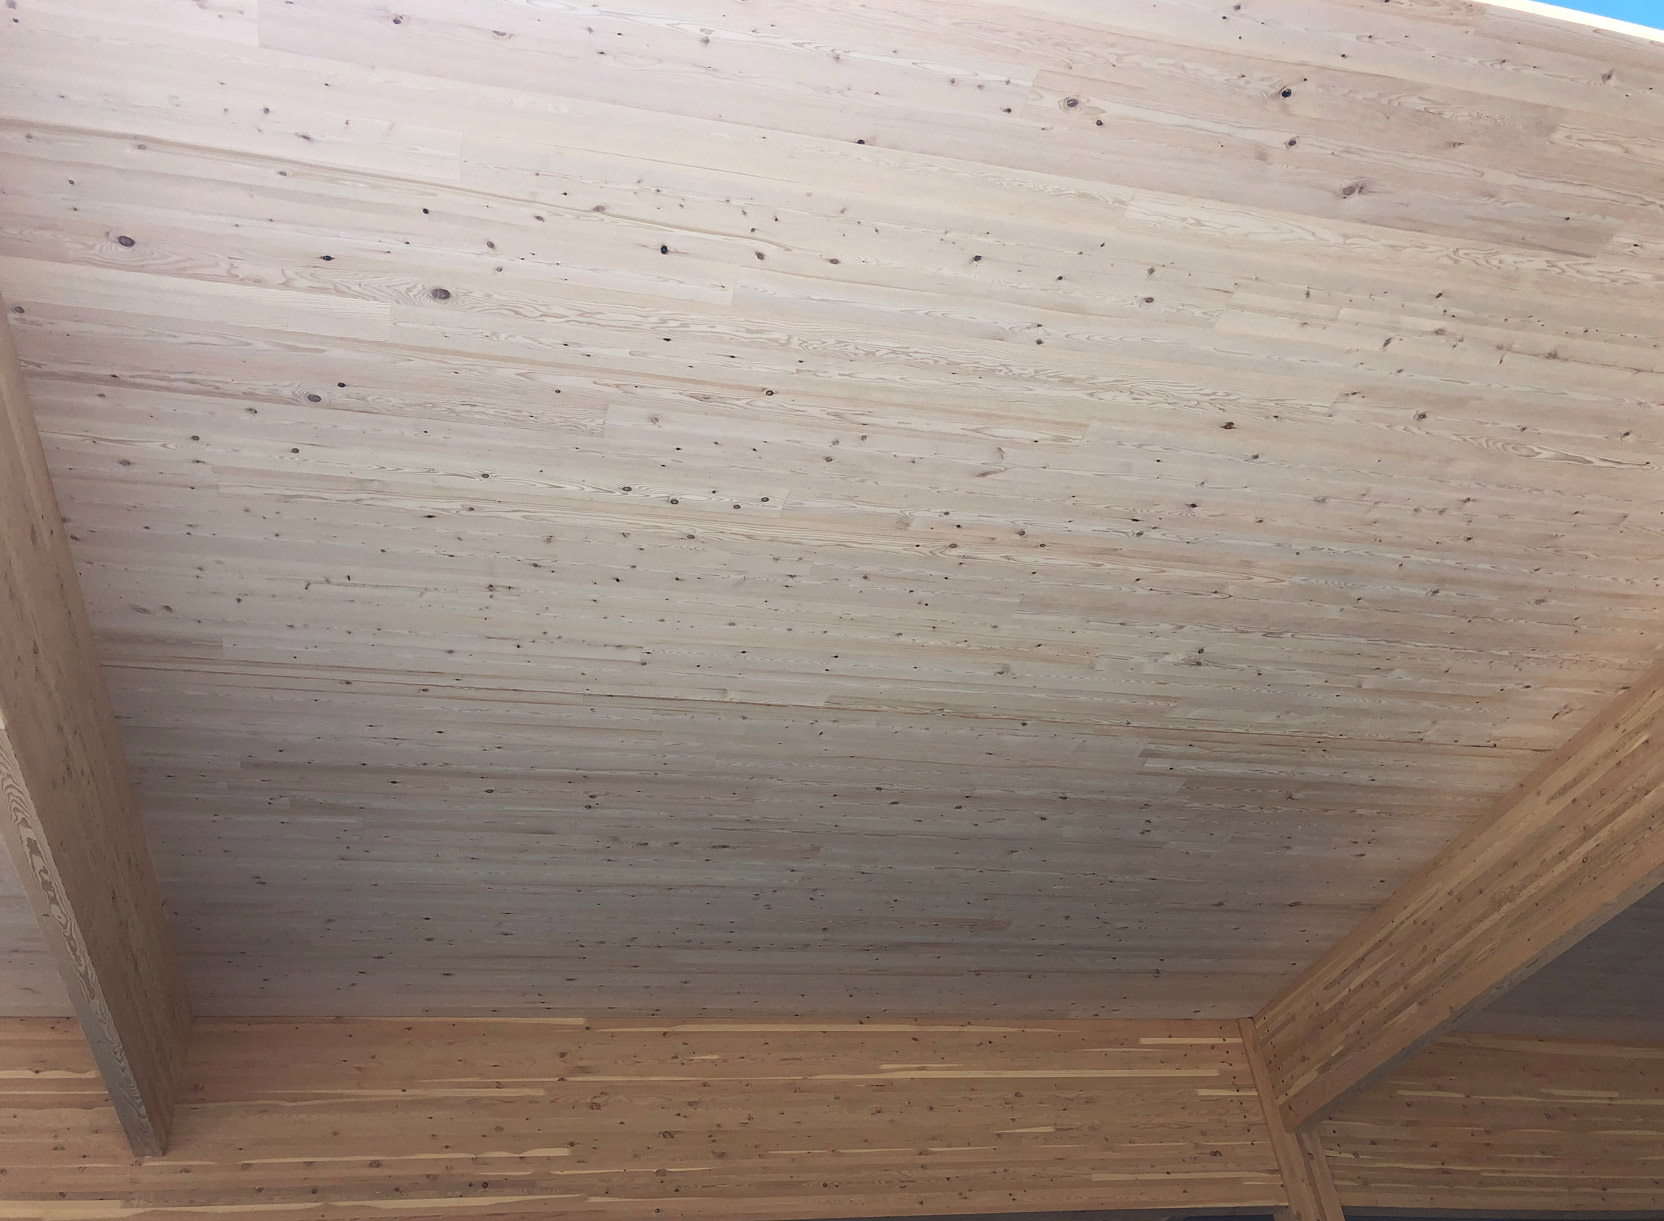 Pacific HemFir Ceiling - Photo Courtesy of Kalesnikoff